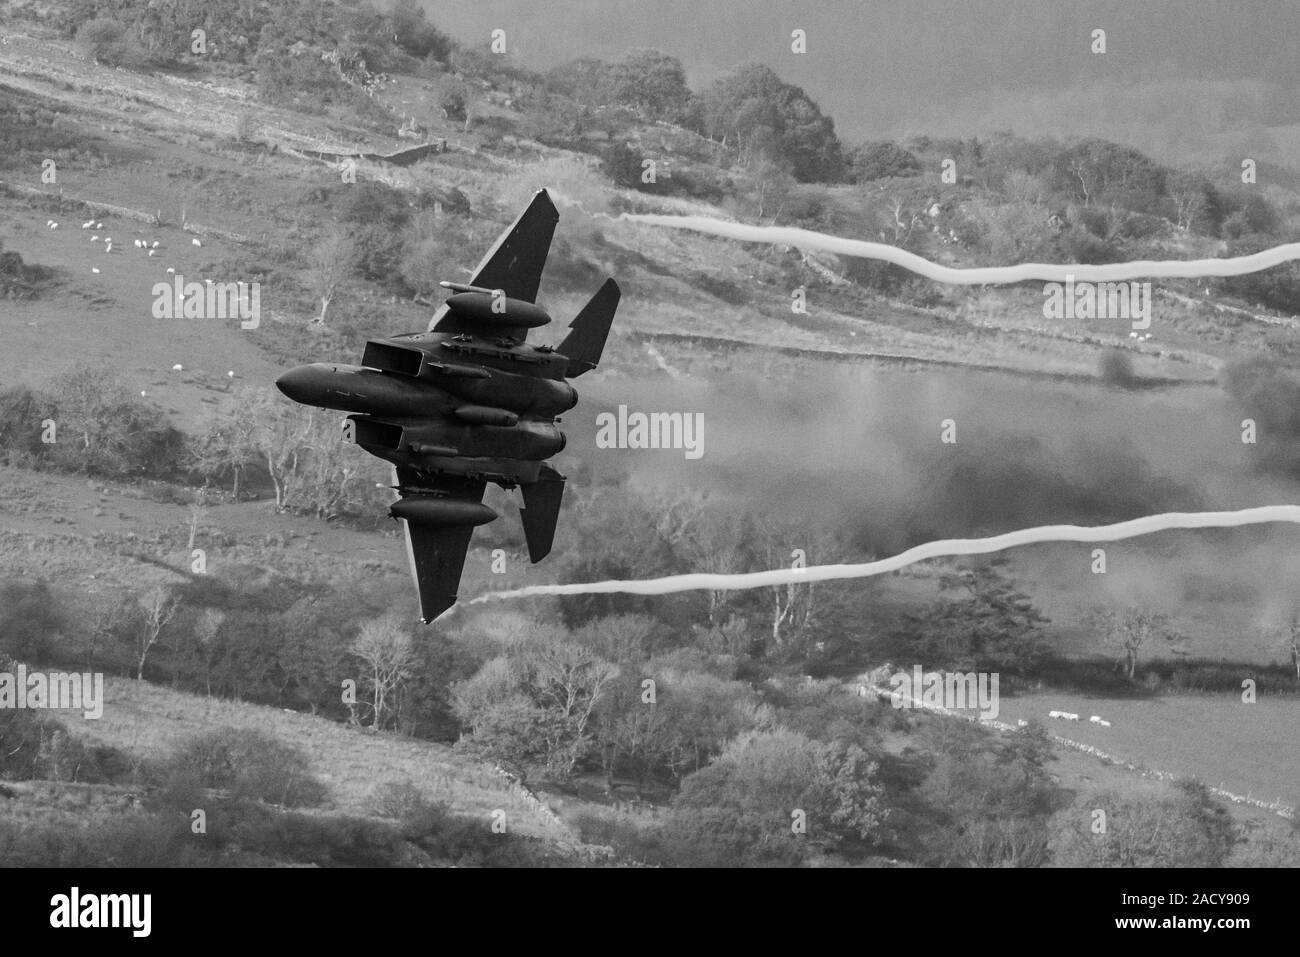 F-15 Eagle, USAF Mc Donnell Douglas low-level fighter jet flying from Valley Anglesey through the Mach Loop in Cadair Idris Wales Stock Photo